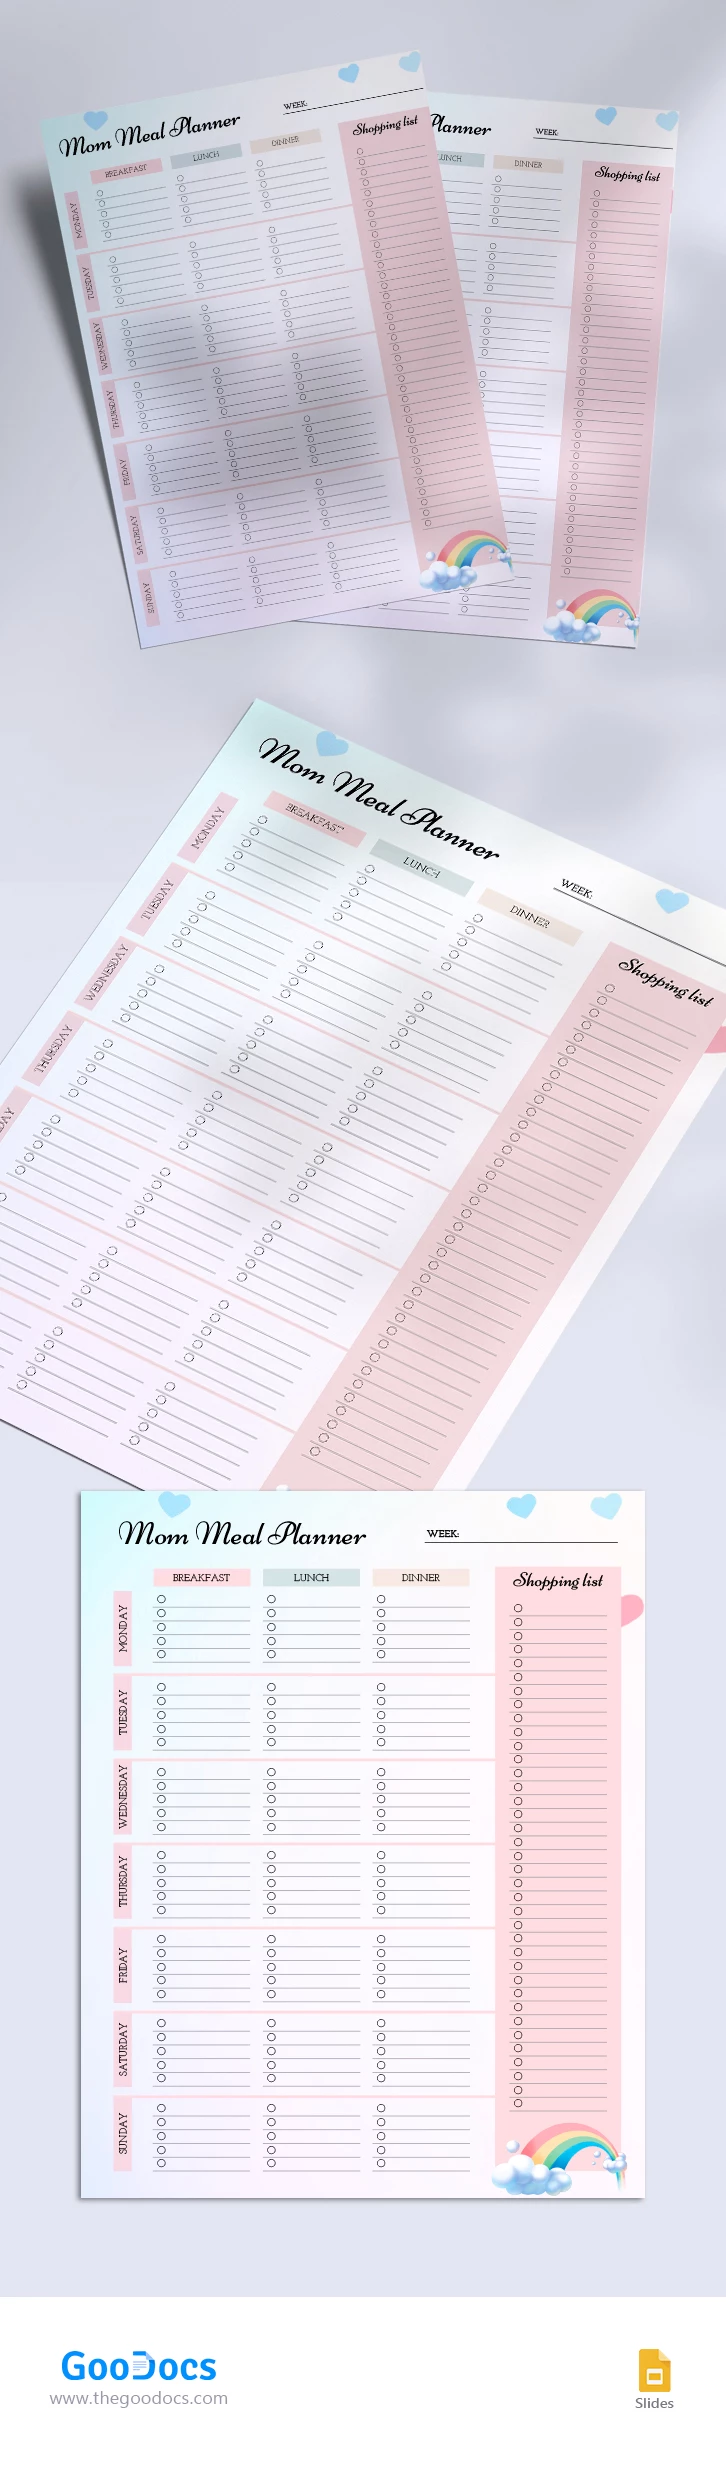 Mom Meal Planner - free Google Docs Template - 10067731